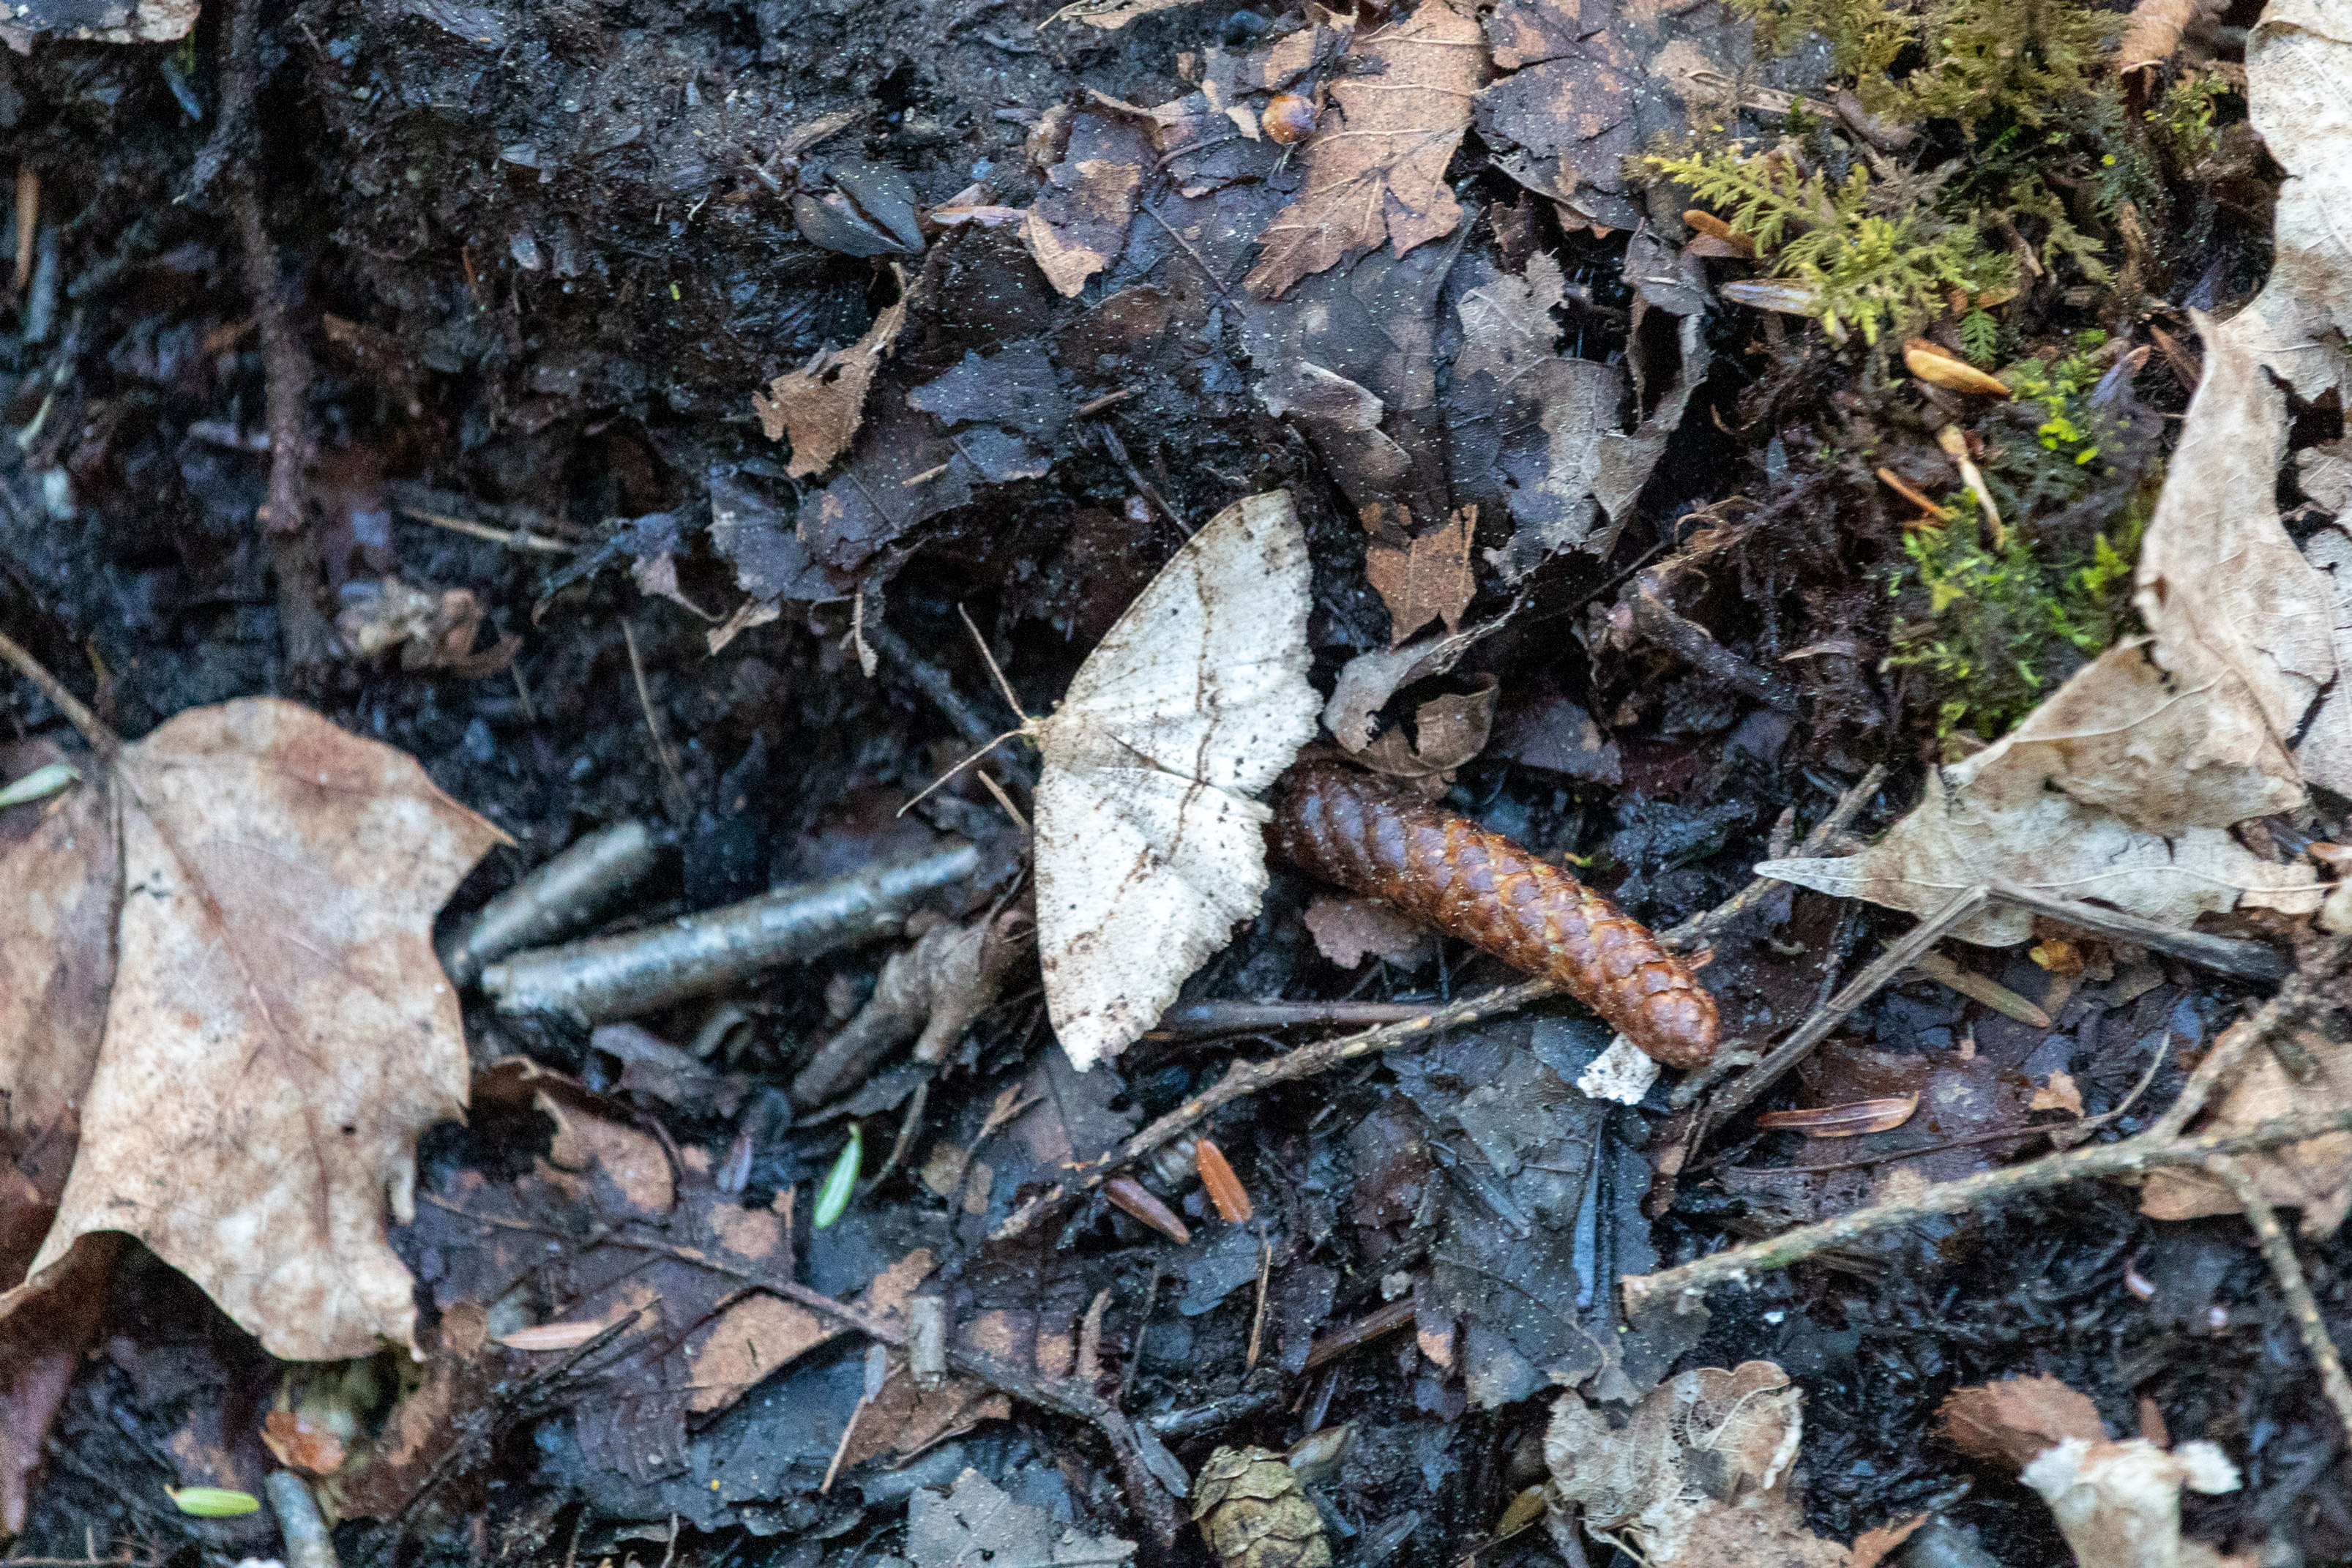 Pale moth sitting on the forest floor, surrounded by leaves and pinecones